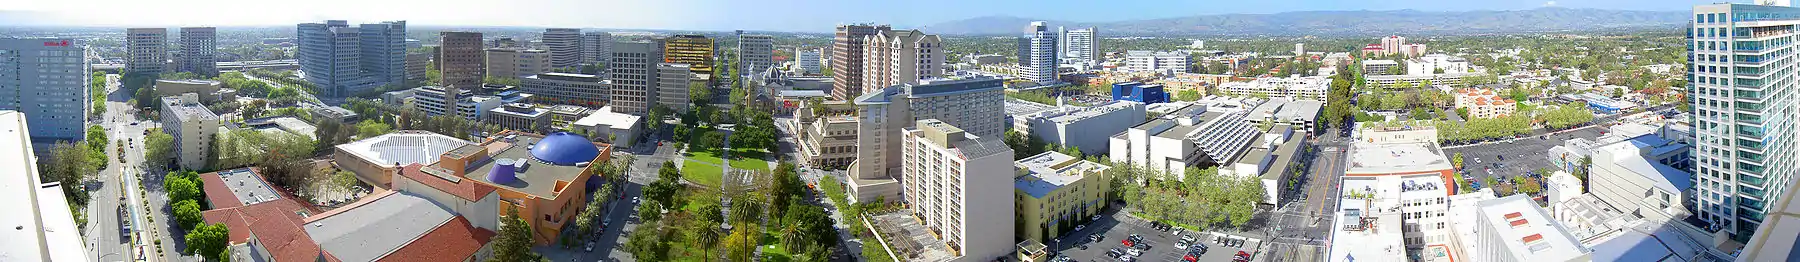 San Jose, the most populous city in Northern California and the San Francisco Bay Area, and the tenth largest city in the United States. San Jose is the center of Silicon Valley, the preeminent region for technology in the country.